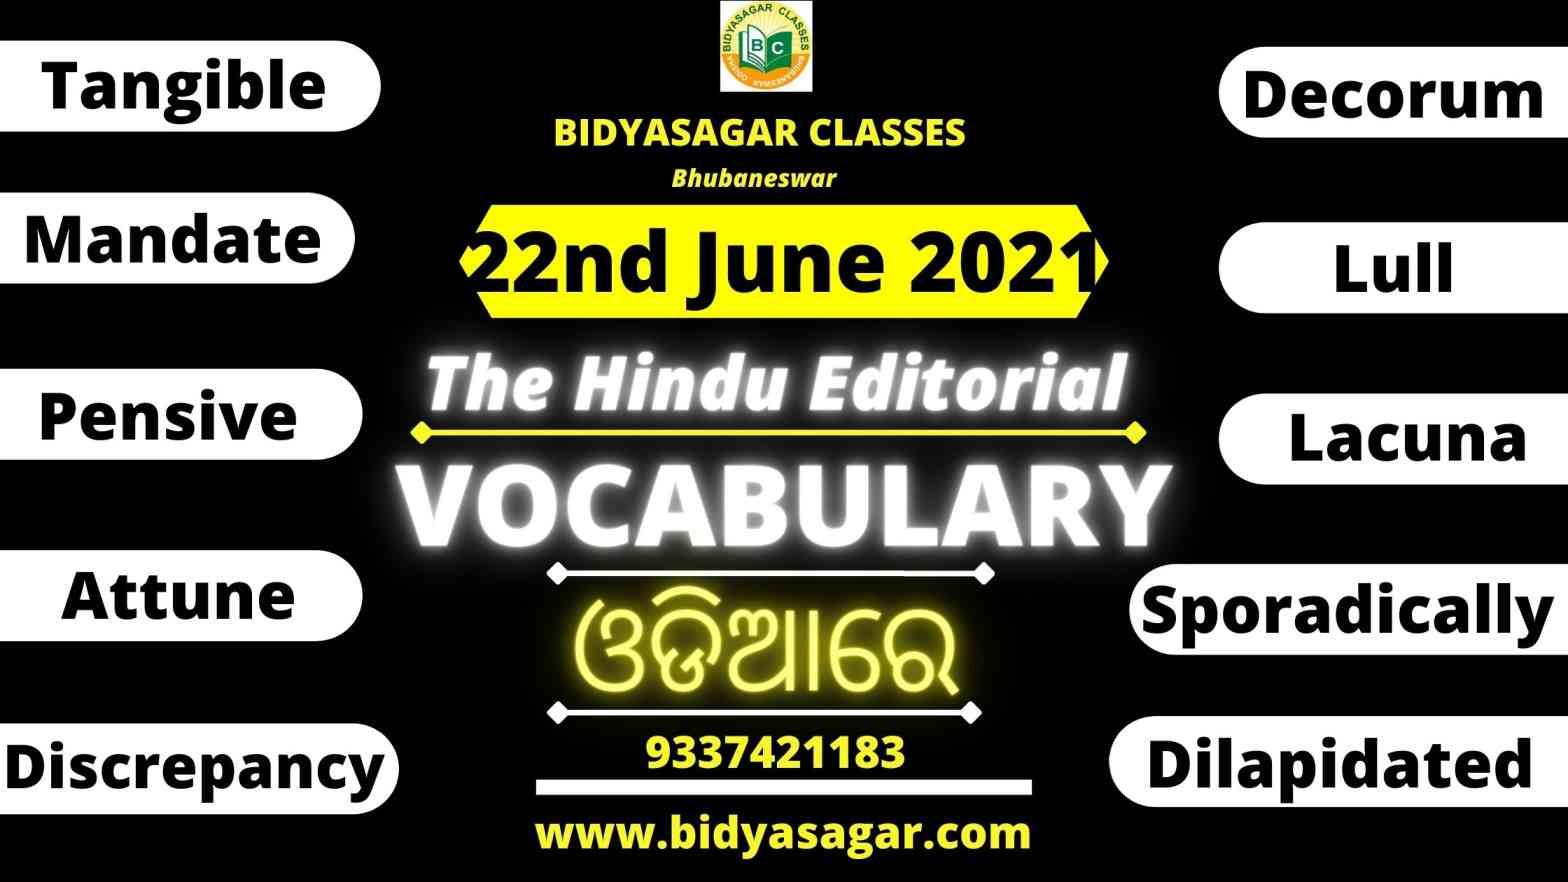 The Hindu Editorial Vocabulary of 22nd June 2021